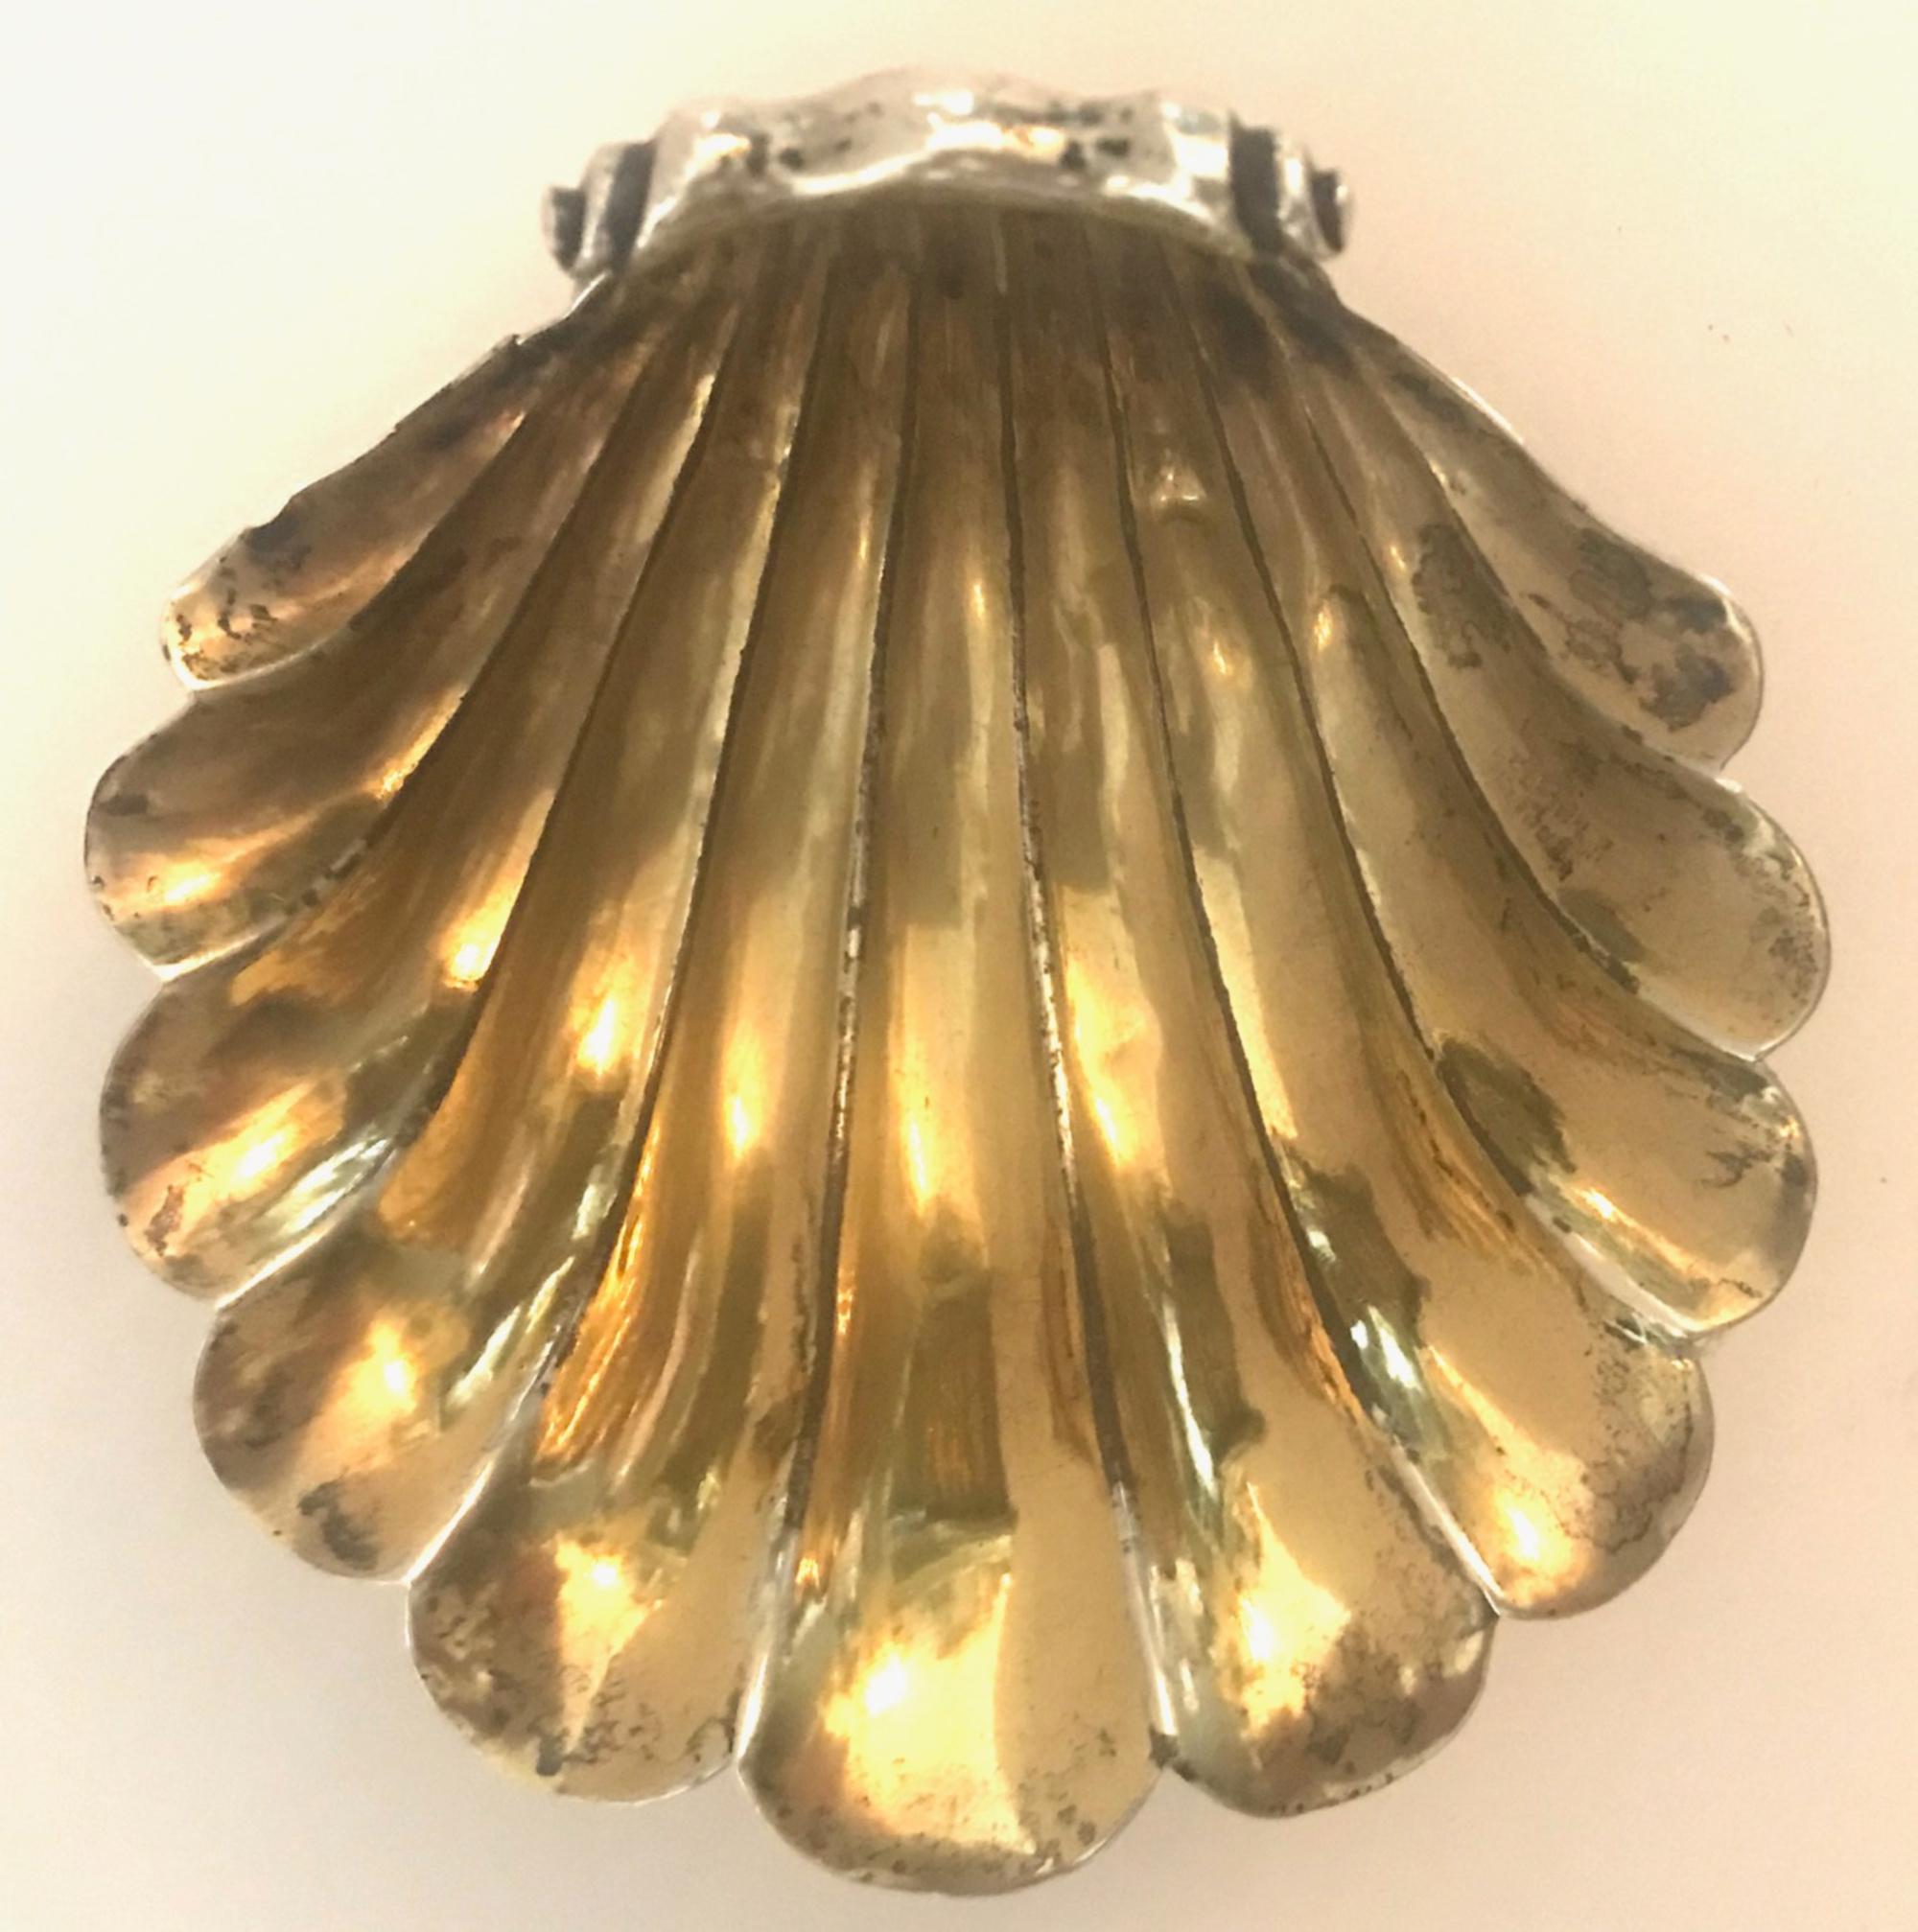 Antique George III silver scallop shell butter dish, 1790

A magnificent Georgian silver cast scallop shell butter dish with curled handle. The rolled over end is engraved with a family bear crest. This handsome shell dish sits on three cast conch